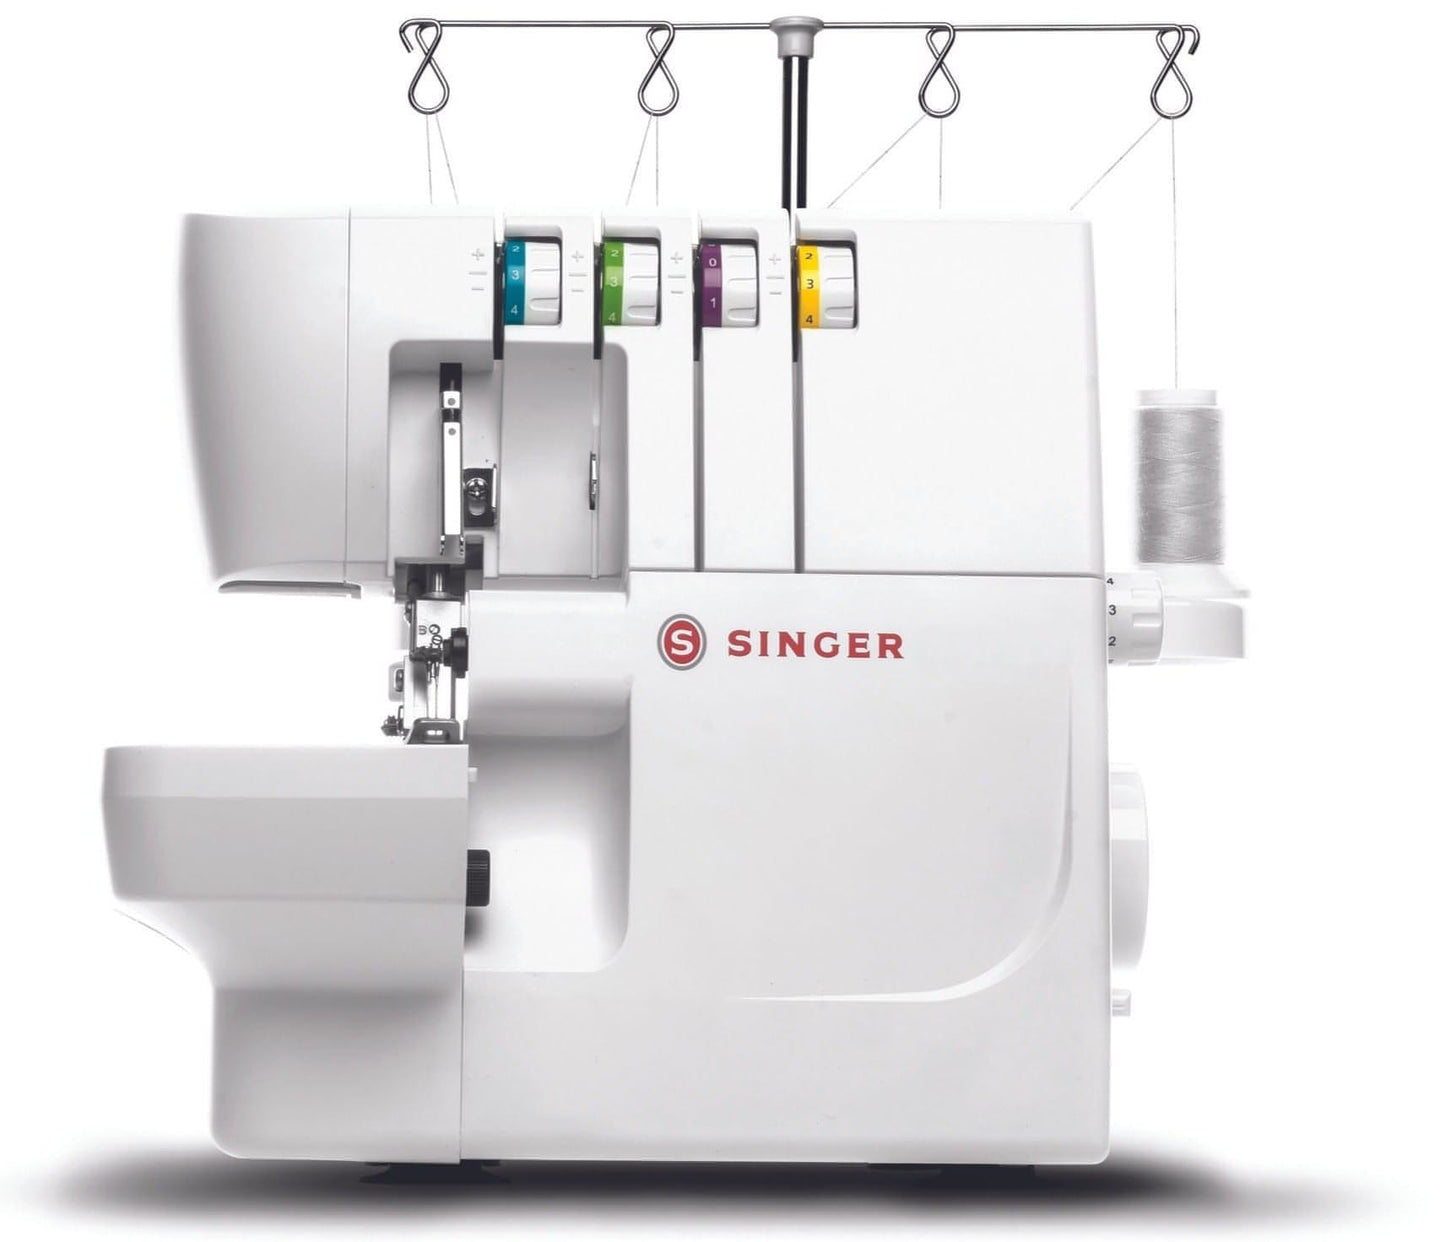 Singer S0105 Overlocker with differential feed for stretch fabrics - Ex Display